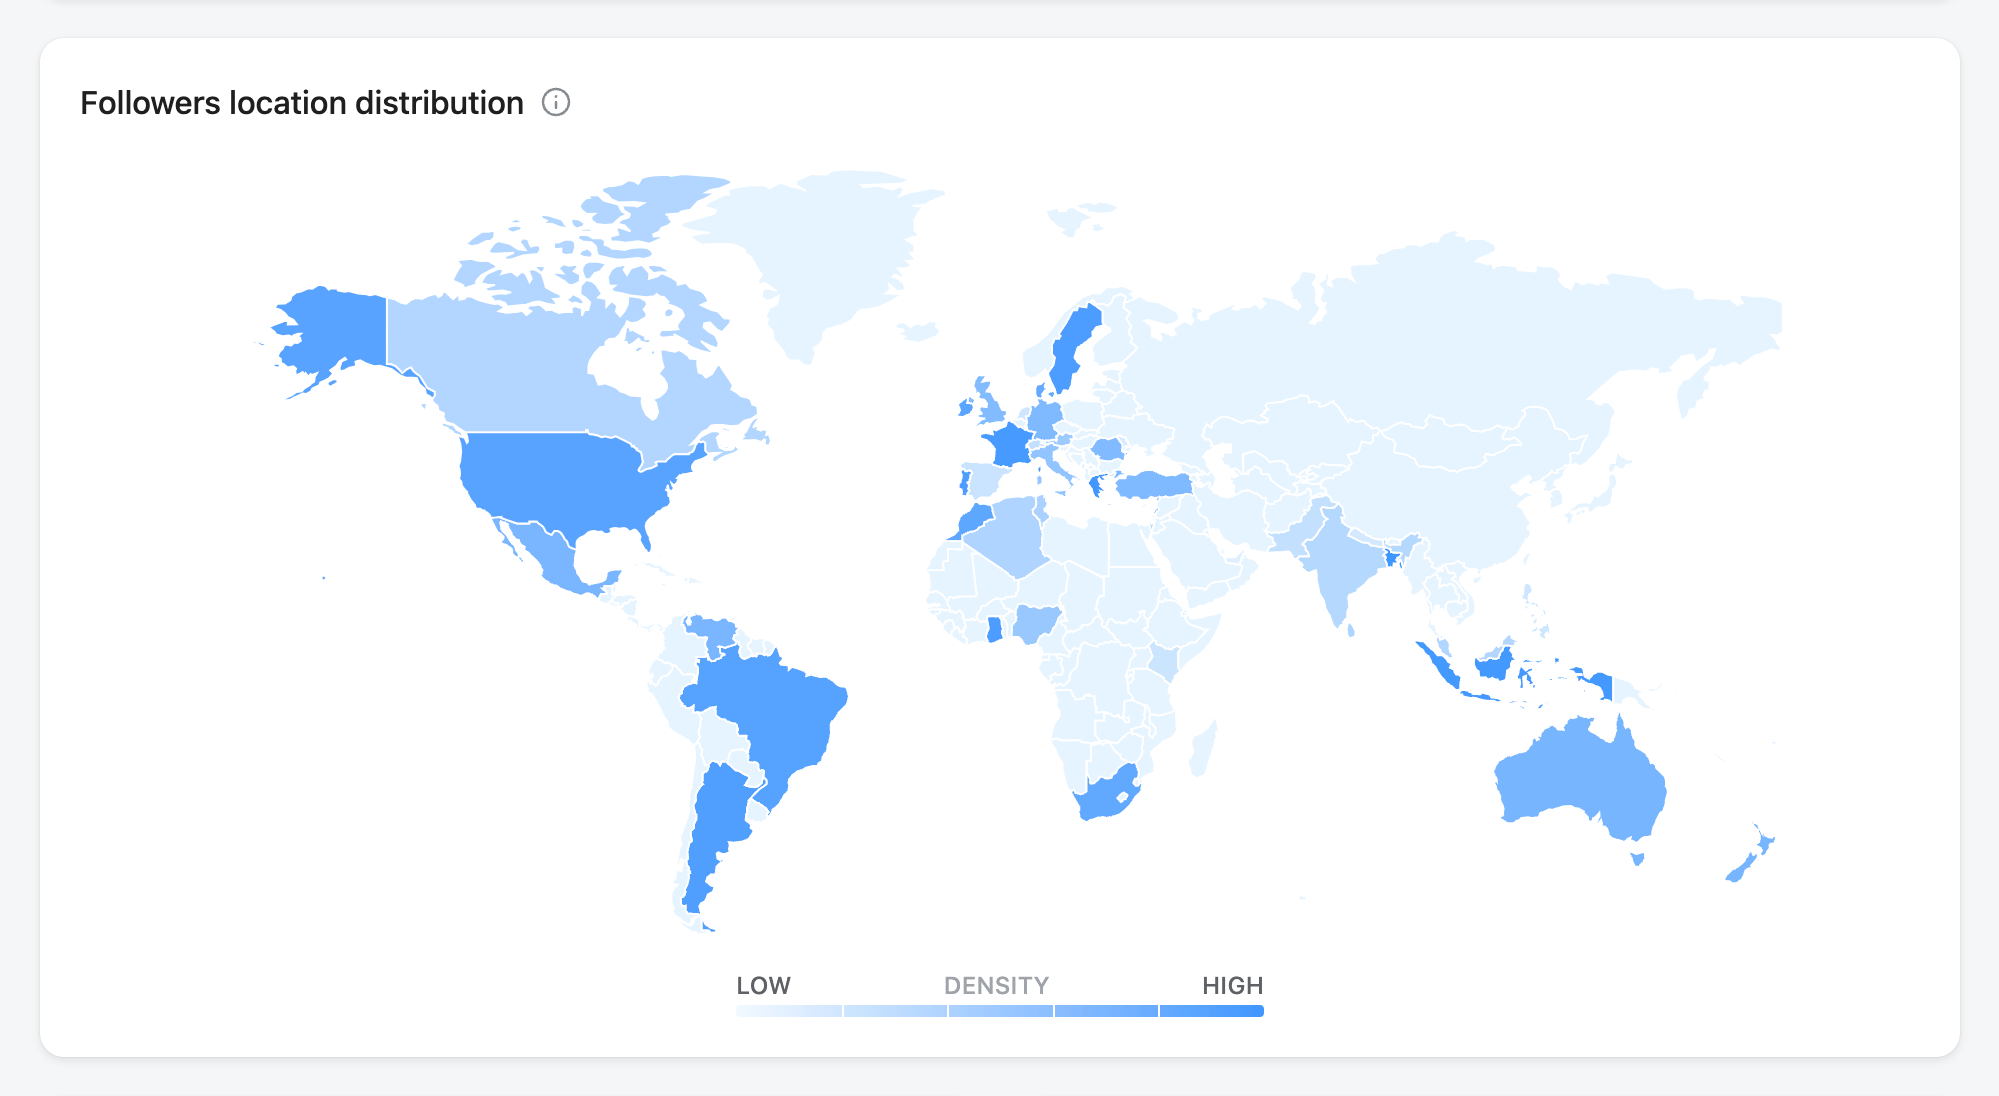 world map showing different shades of blue, corresponding to different follower densities